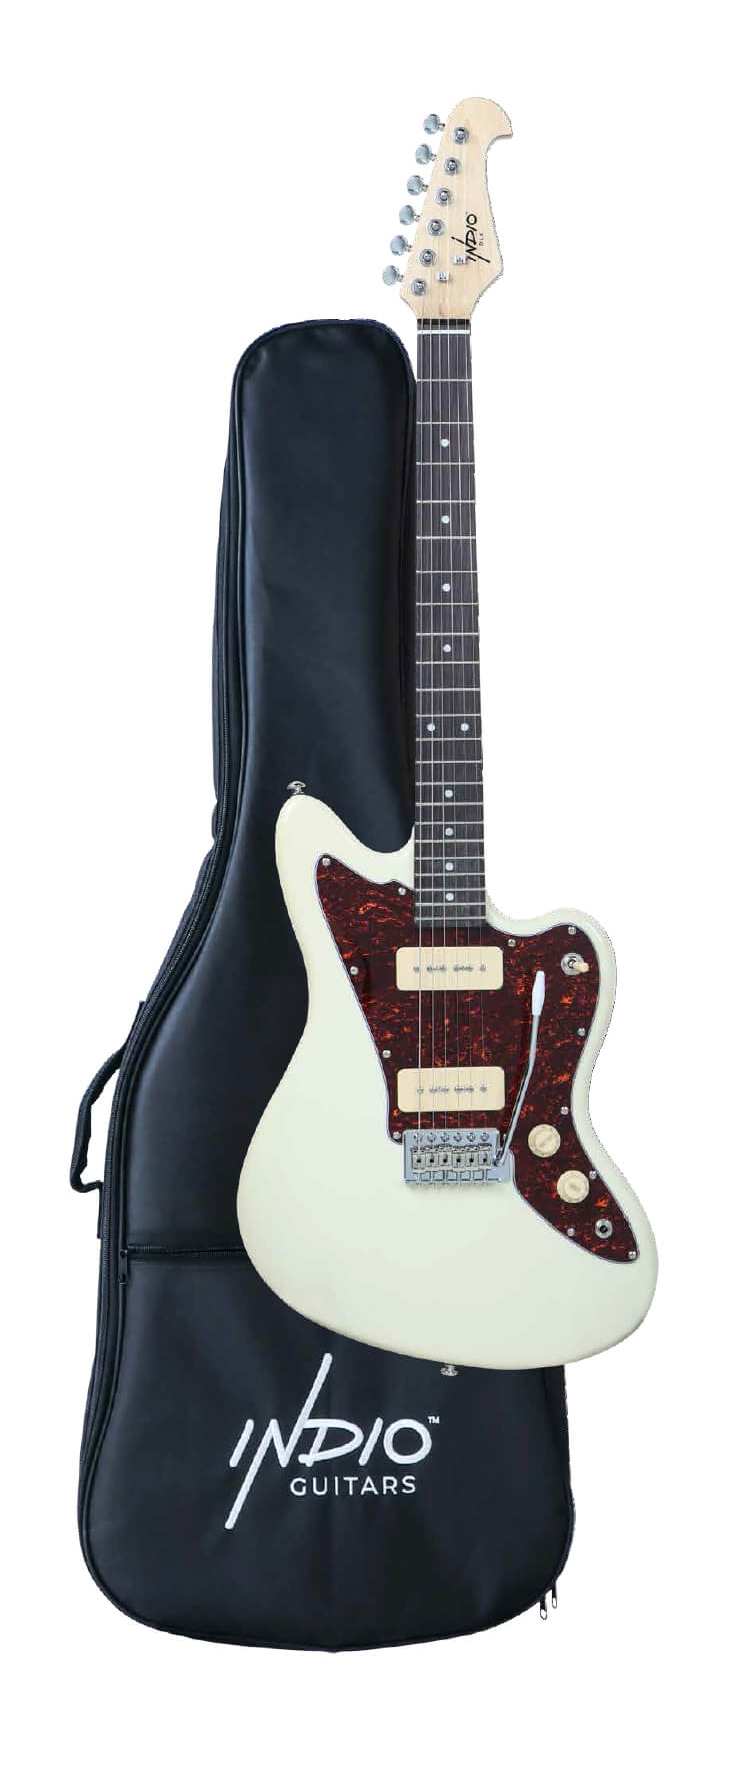 Indio by Monoprice Offset OS30 DLX Electric Guitar with Gig Bag (Ivory) $94.49 + Free Shipping